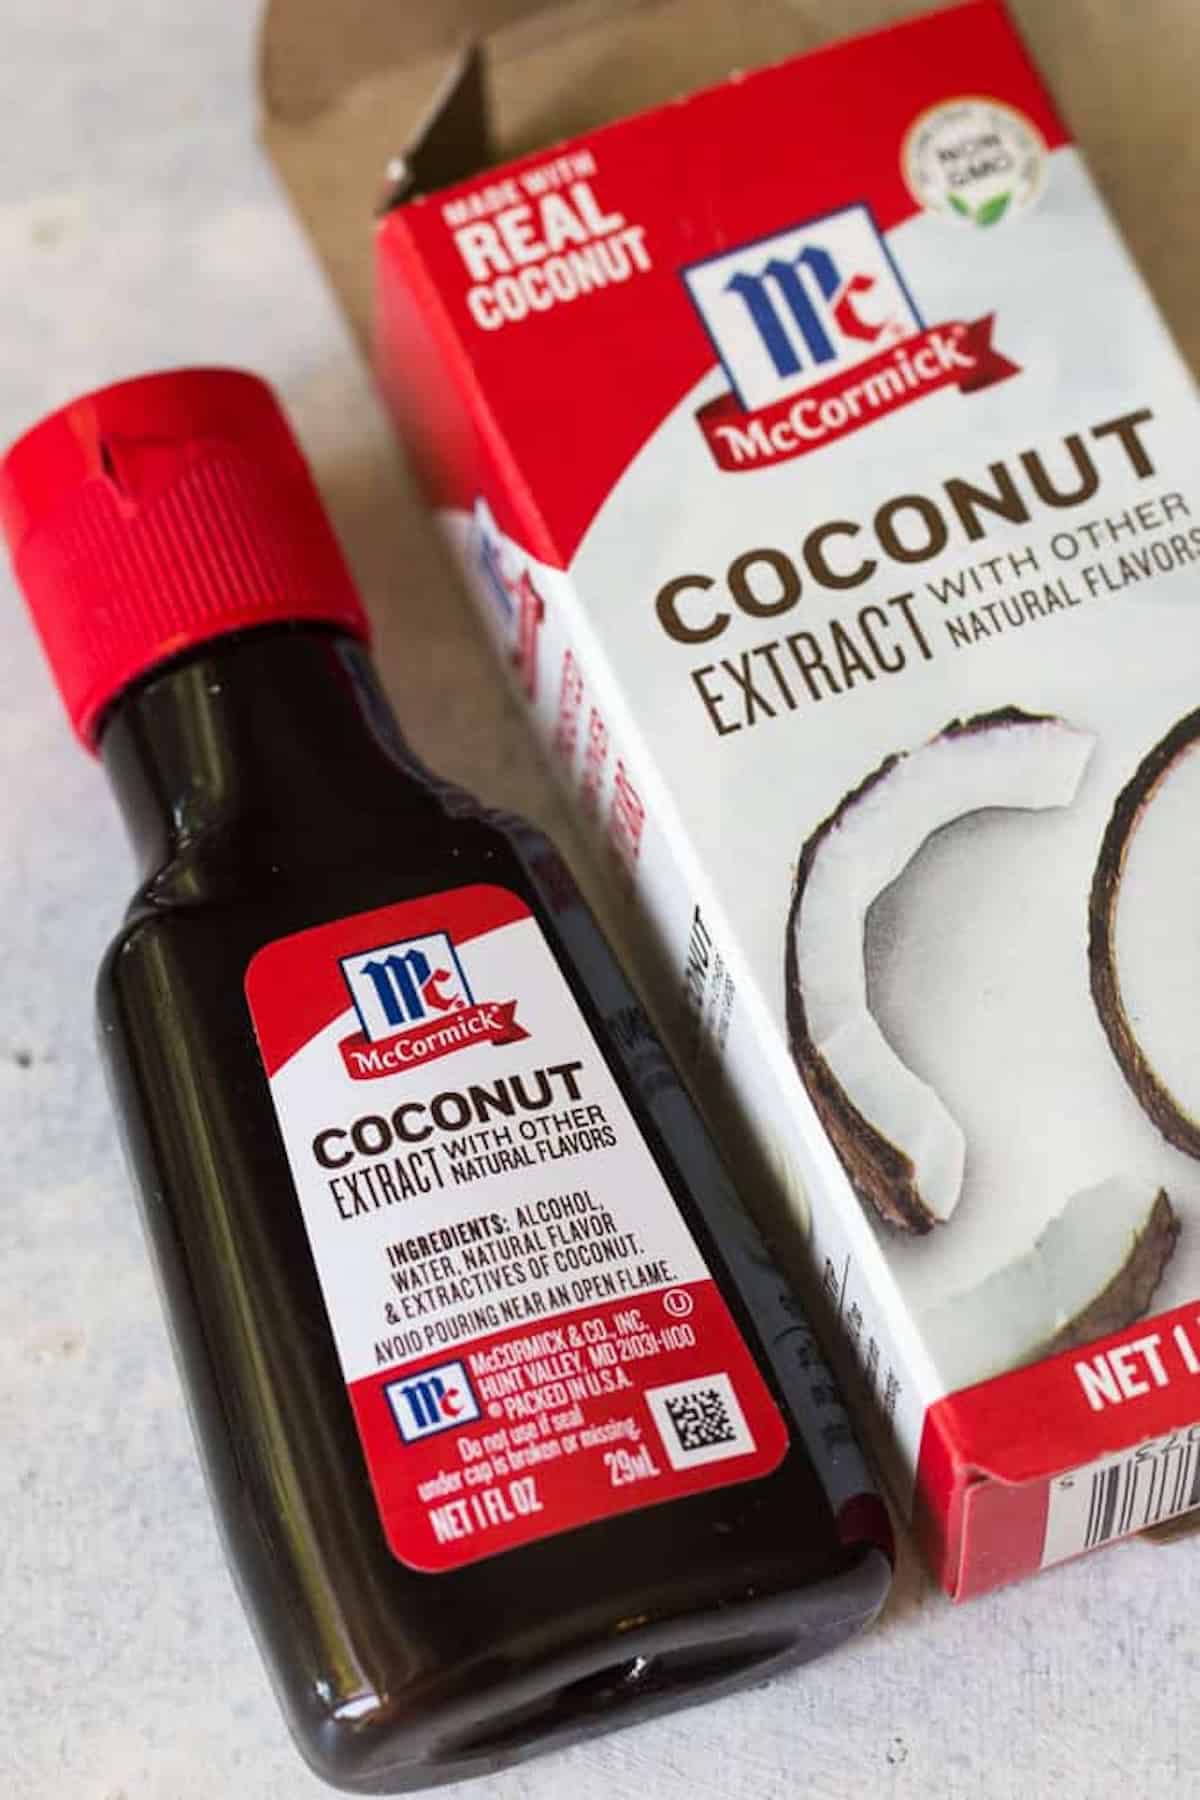 A bottle and its box of McCormick Coconut Extract with other natural flavors, made with real coconut. The bottle is dark and labeled, placed next to the red and white box featuring coconut images.